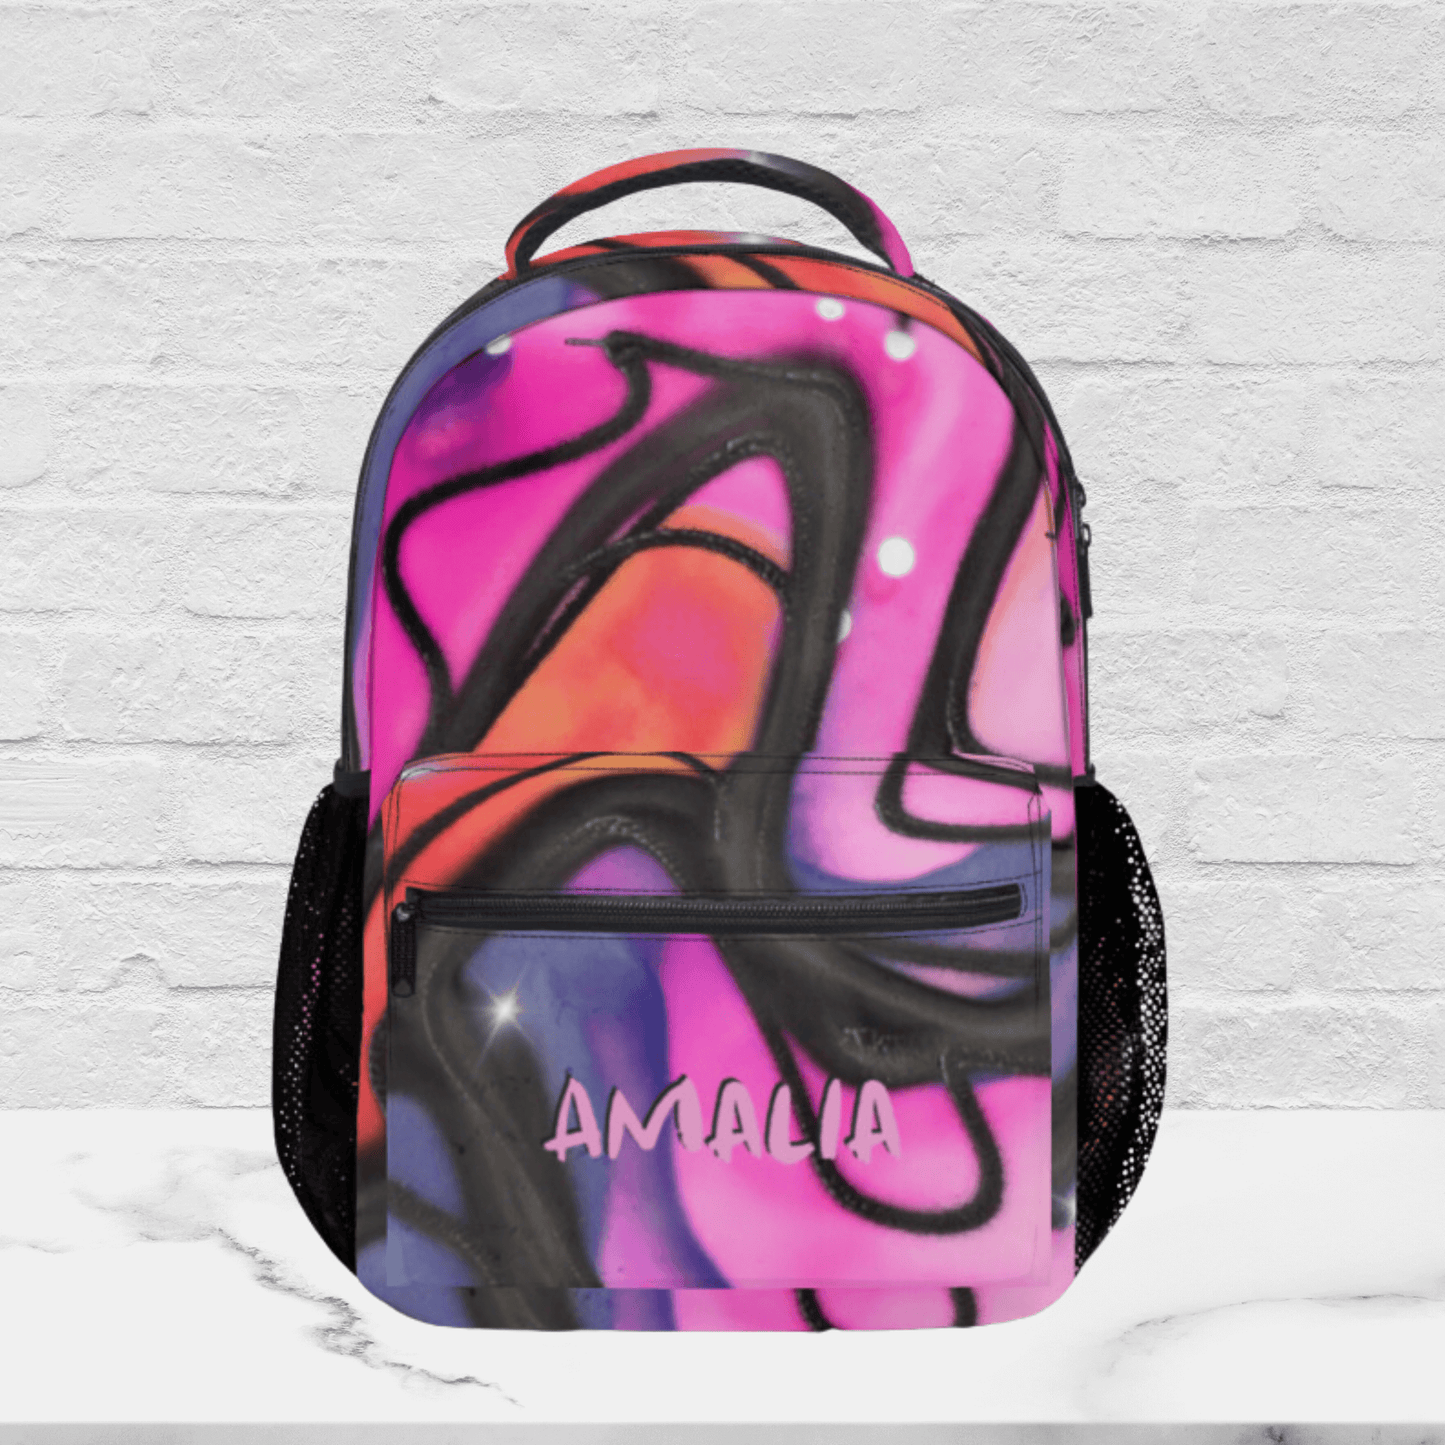 OUr colorful pink backpack can have your name added in pink on the exterior pocket.